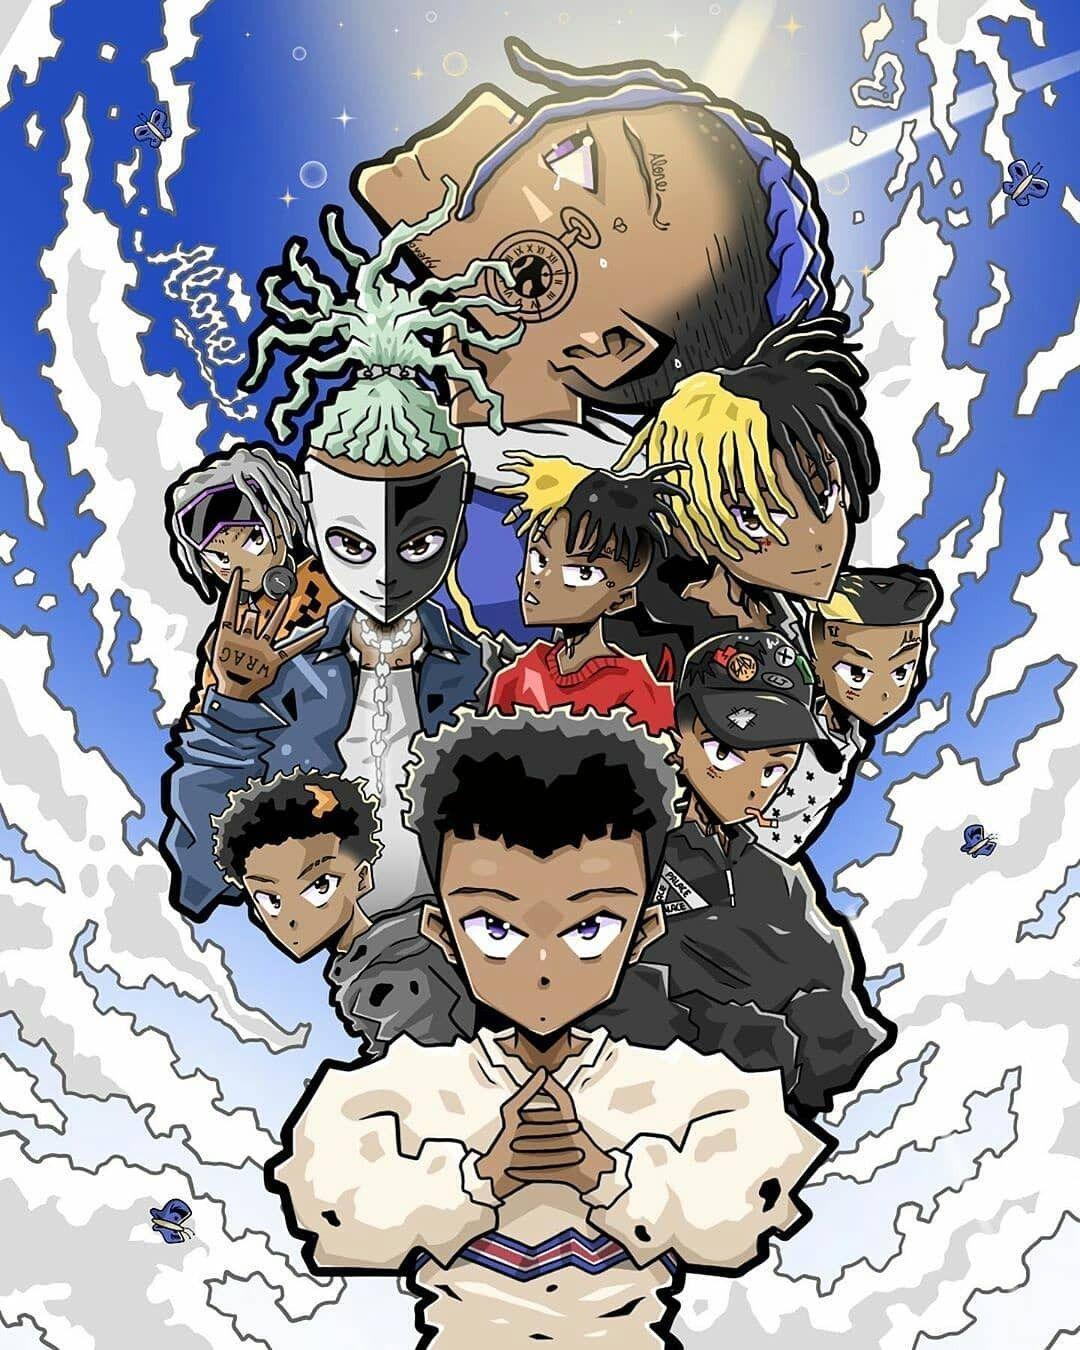 Christian rapper Jarry Manna inspired by Jesus  anime characters heroics   God Reports